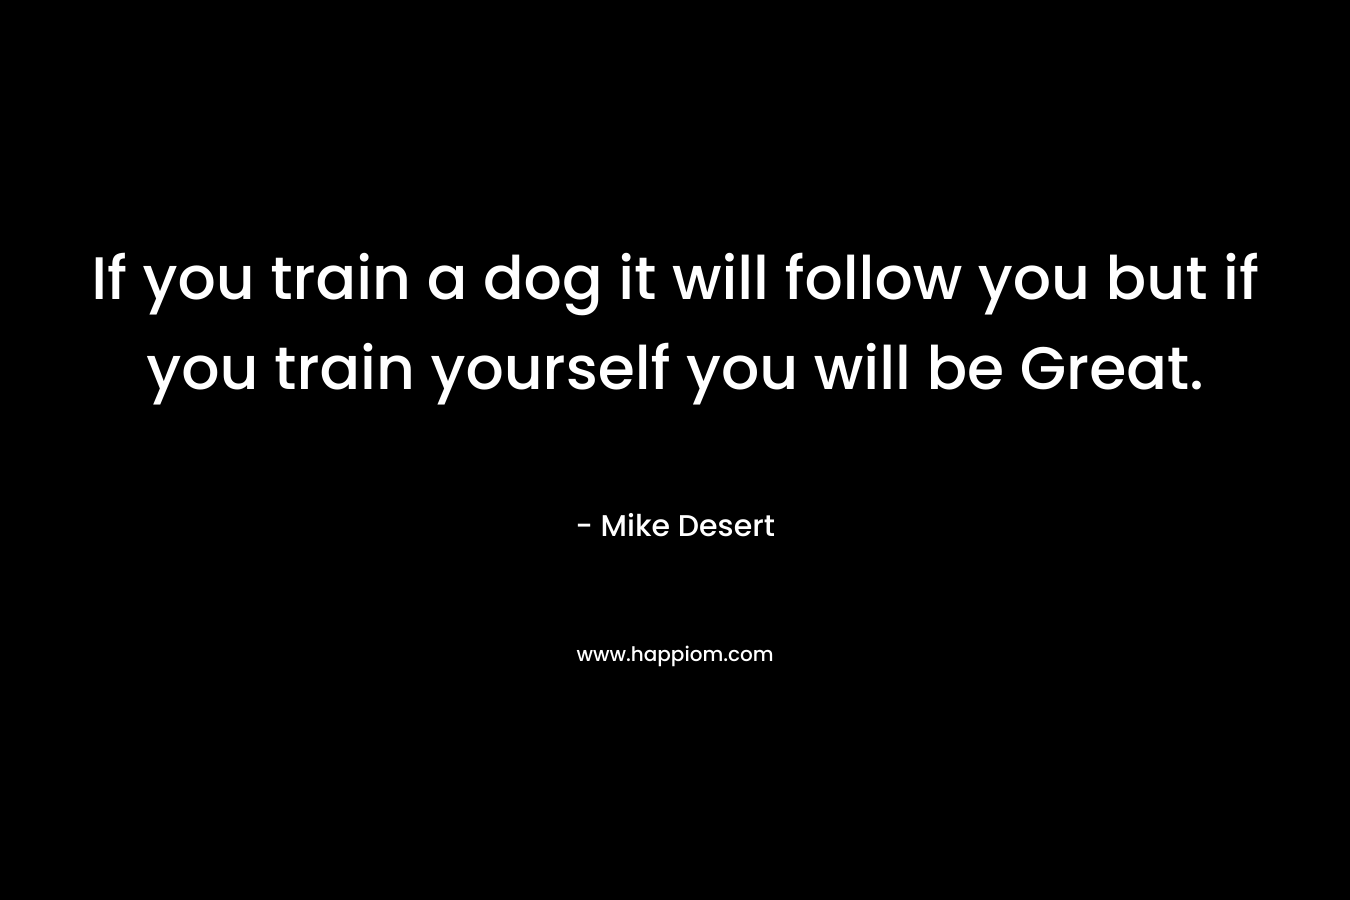 If you train a dog it will follow you but if you train yourself you will be Great.